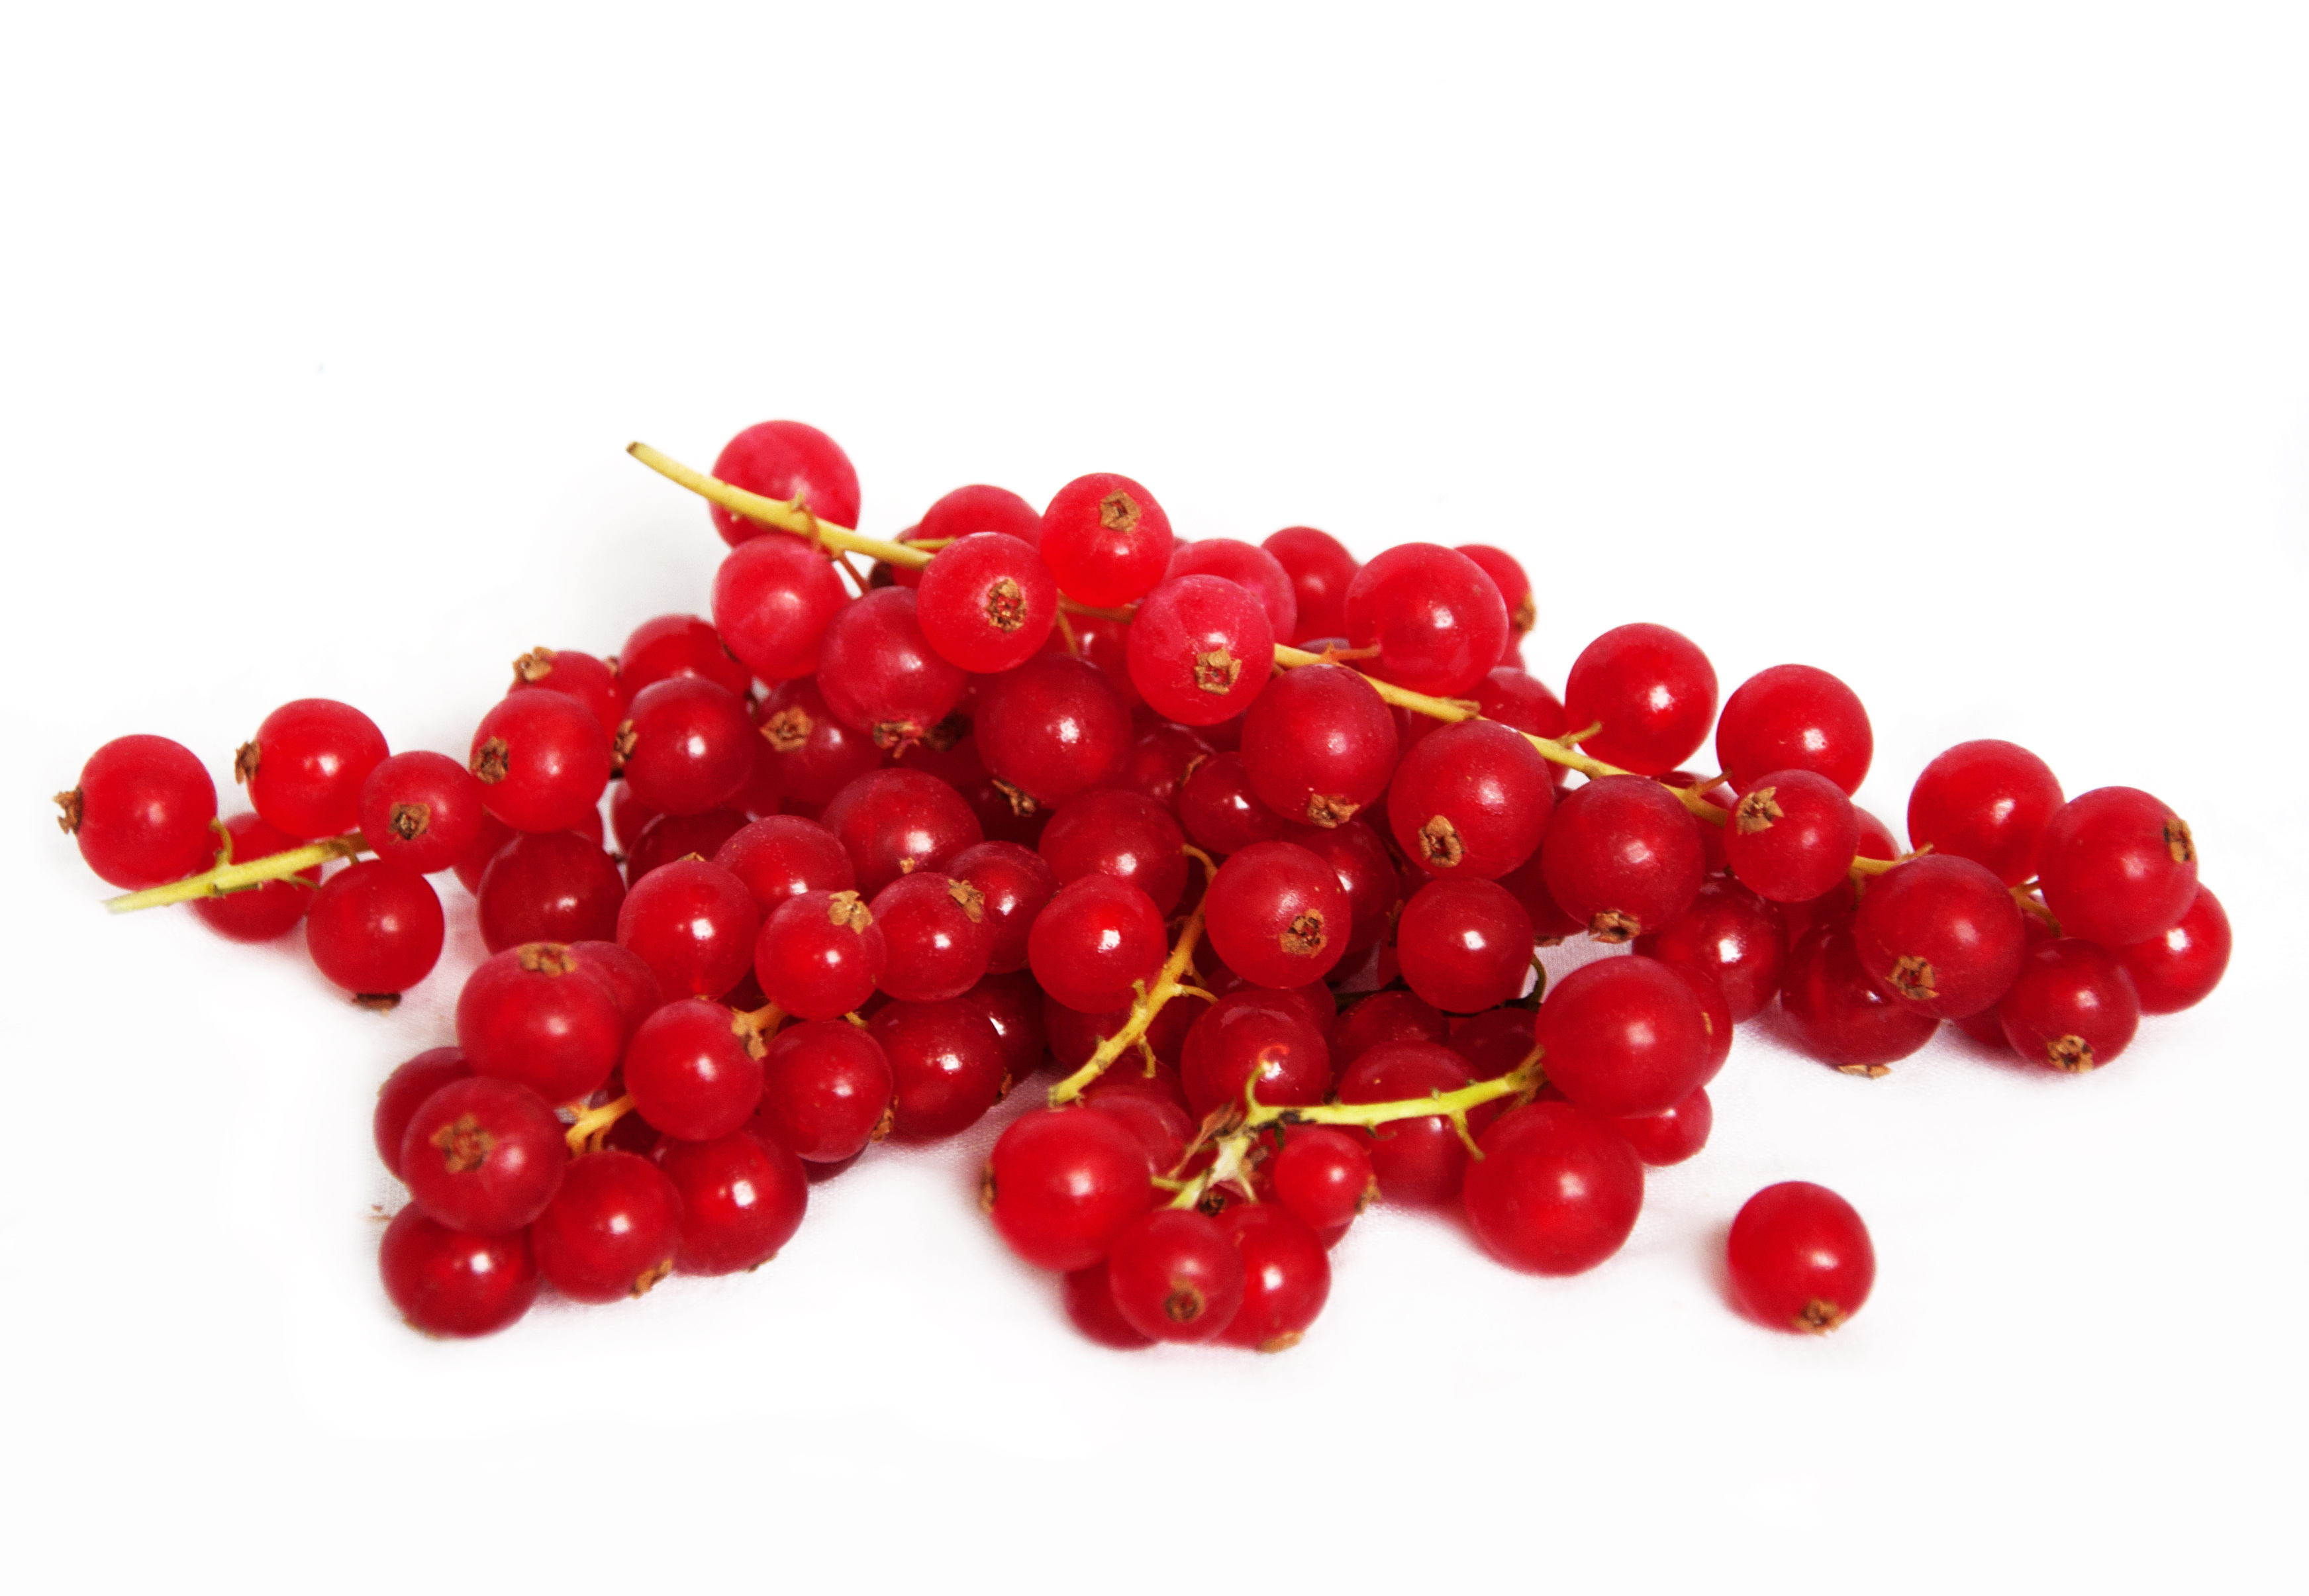 Red currant photo